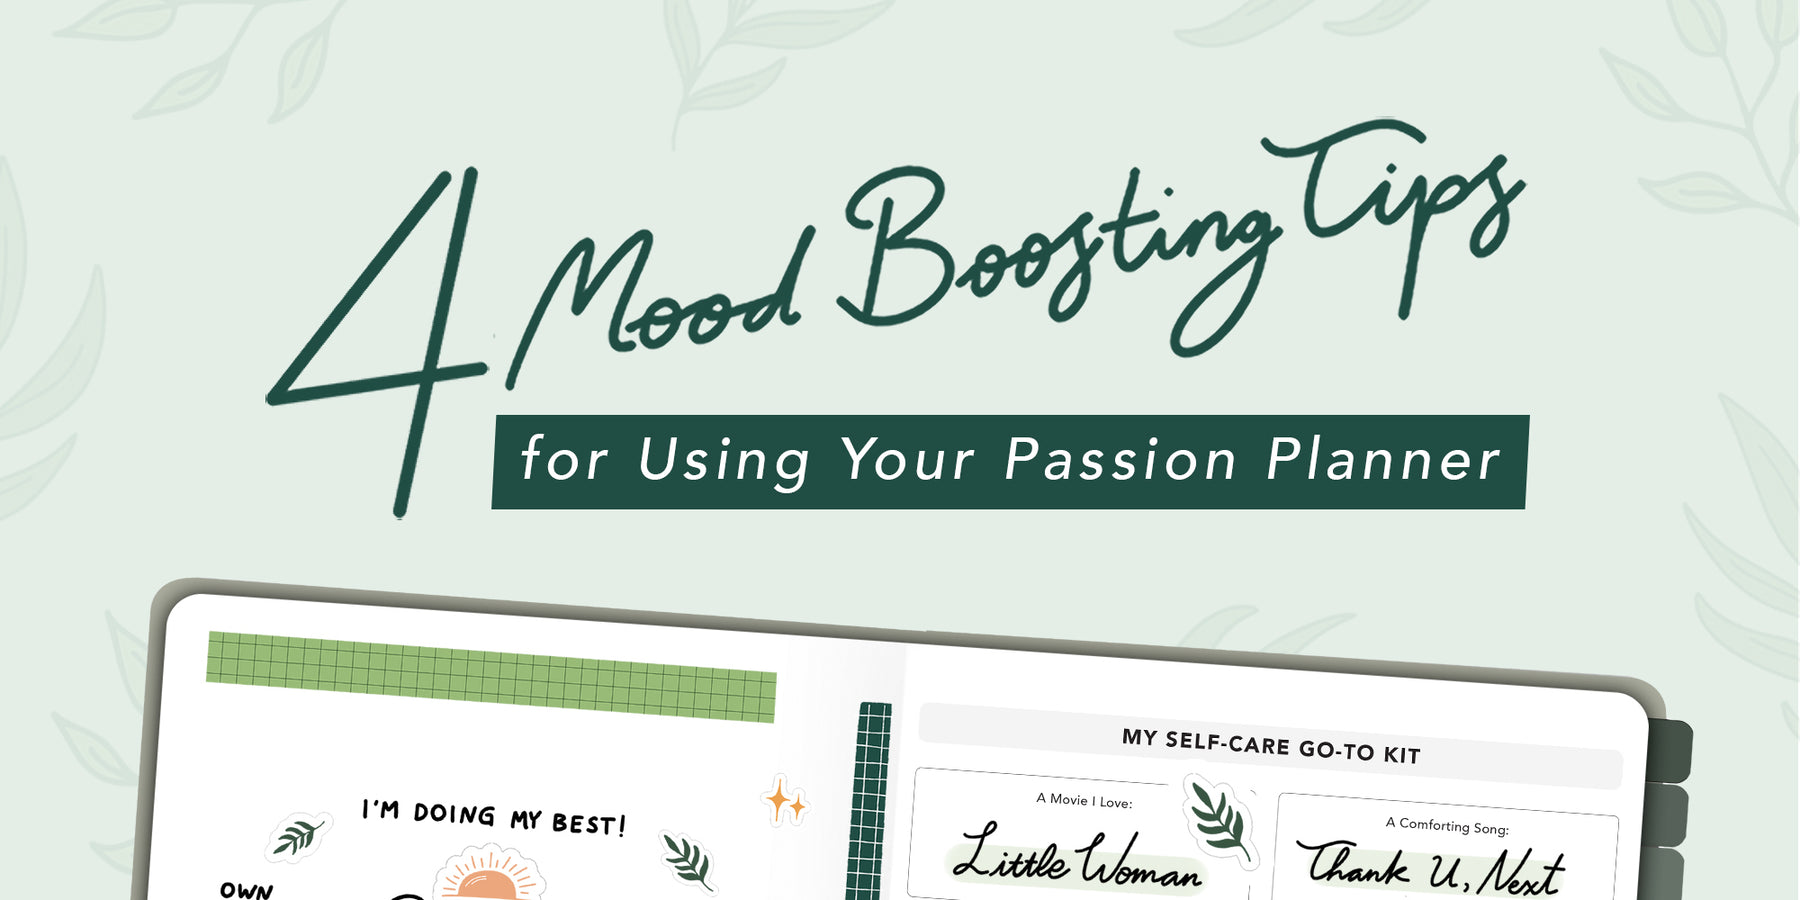 Staying Positive: 4 Mood Boosting Tips for Using Your Passion Planner